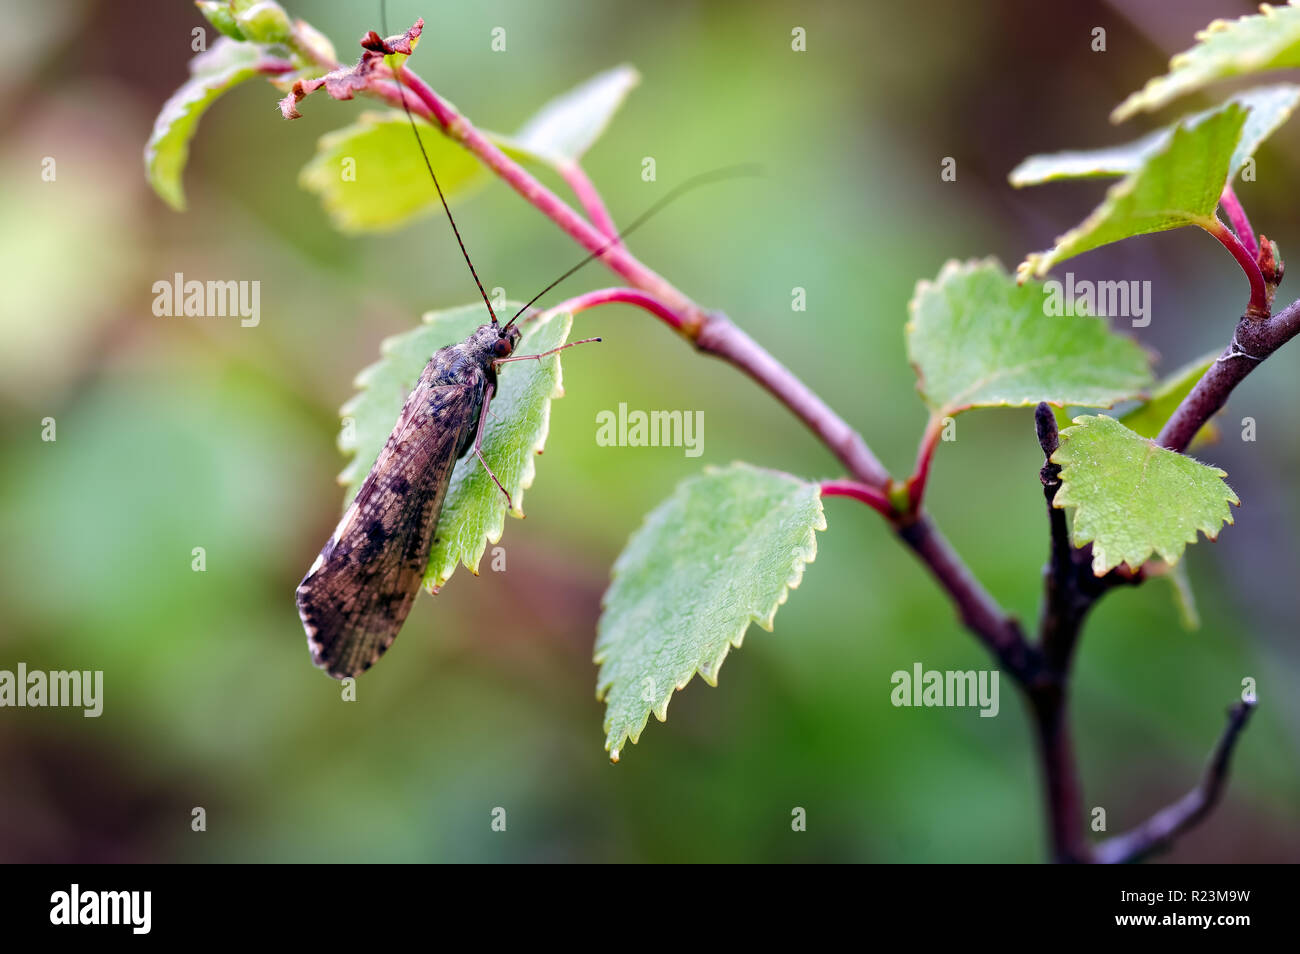 Image of a Caddis Fly (Polycentropodidae) resting on a birch leaf in the wilds of Glen Affric, Scotland Stock Photo